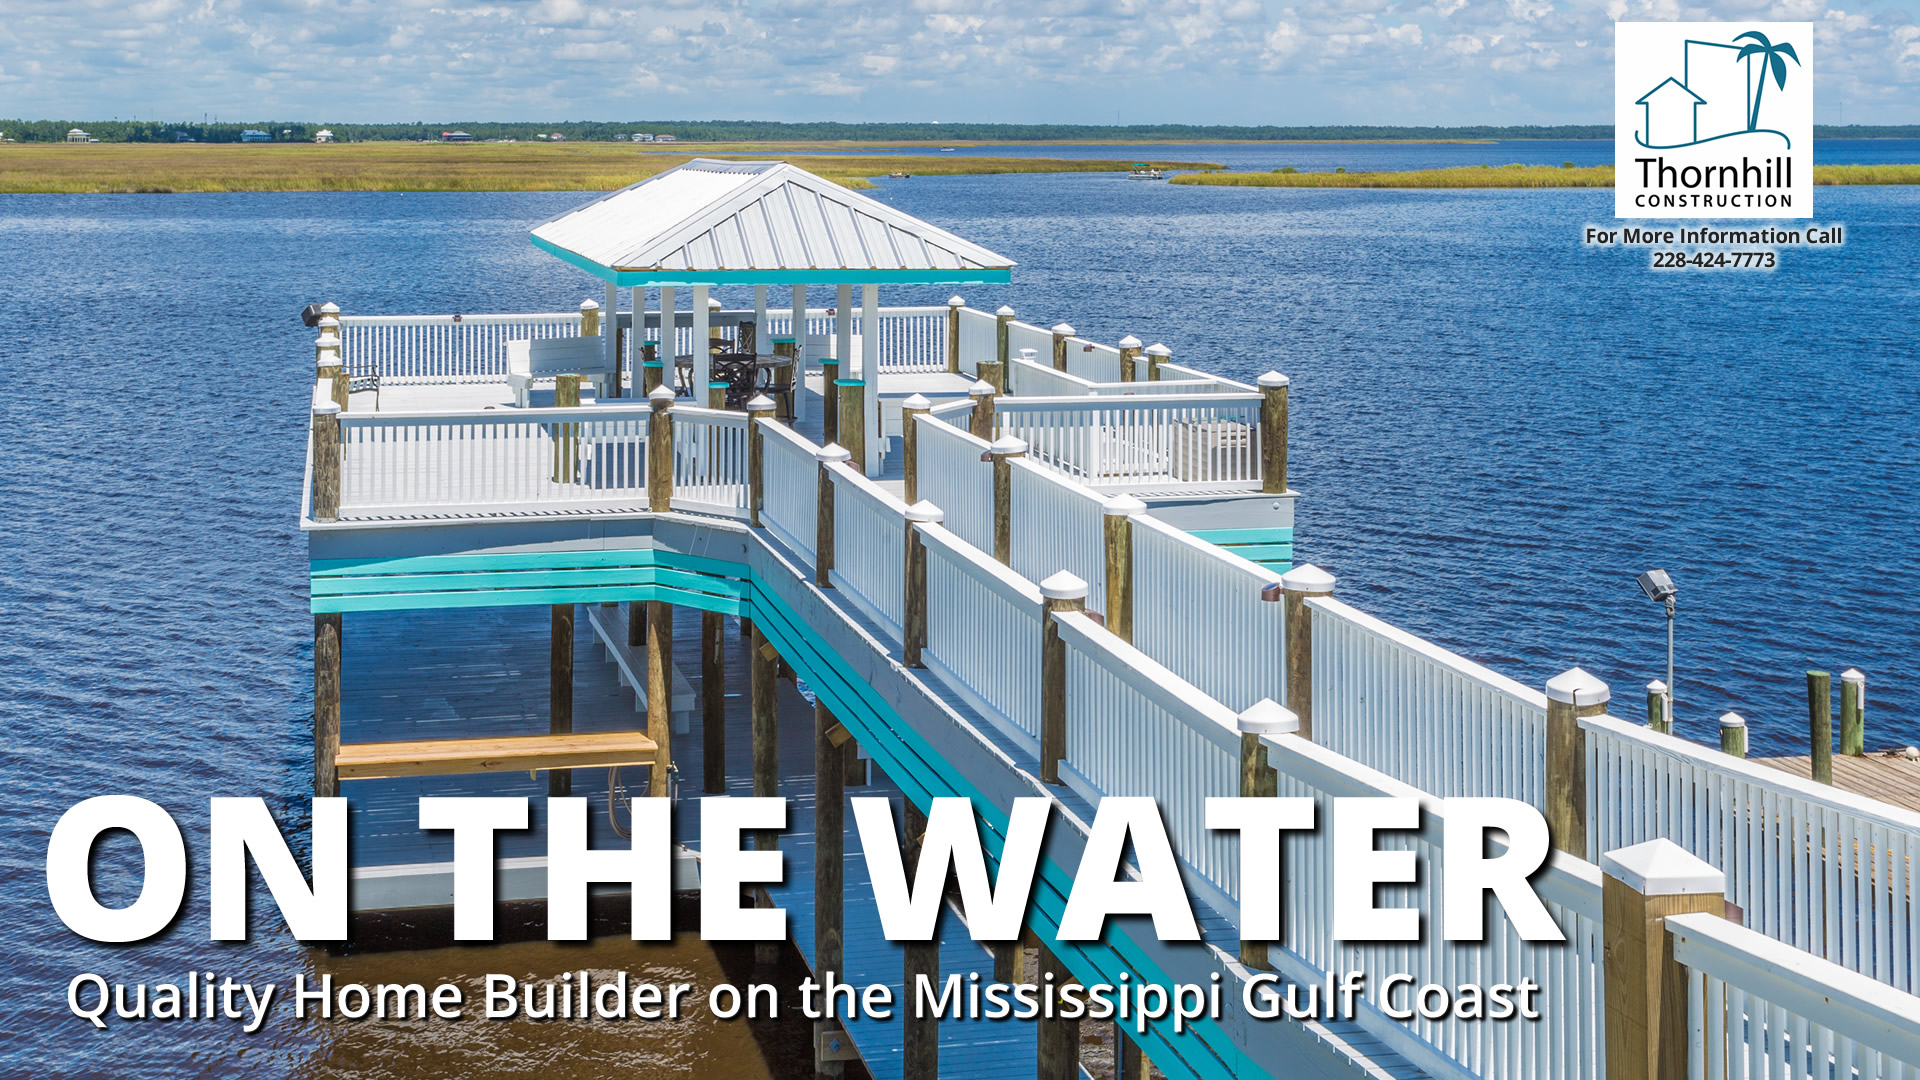 Waterfront home builder on Mississippi Gulf Coast